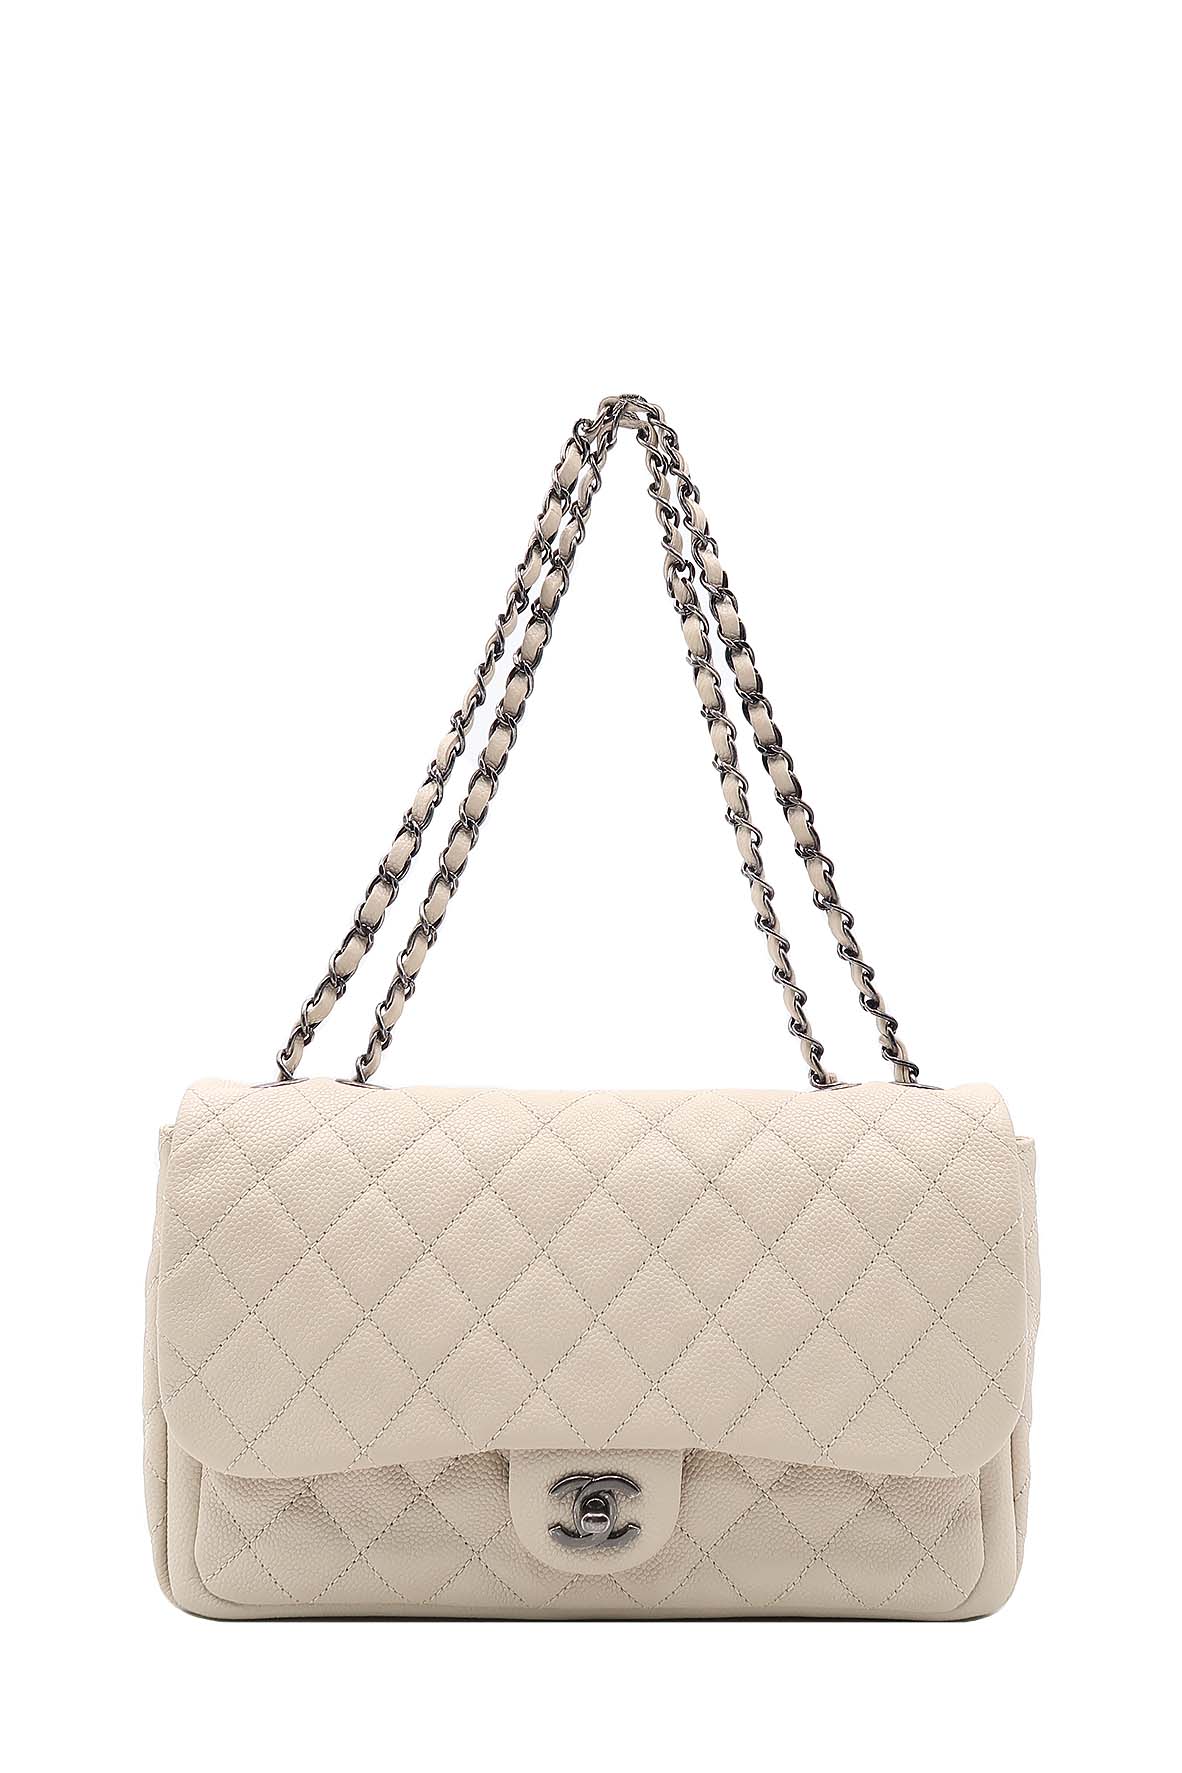 Buy Authentic, Preloved Chanel Large Now & Forever Flap Bag Beige